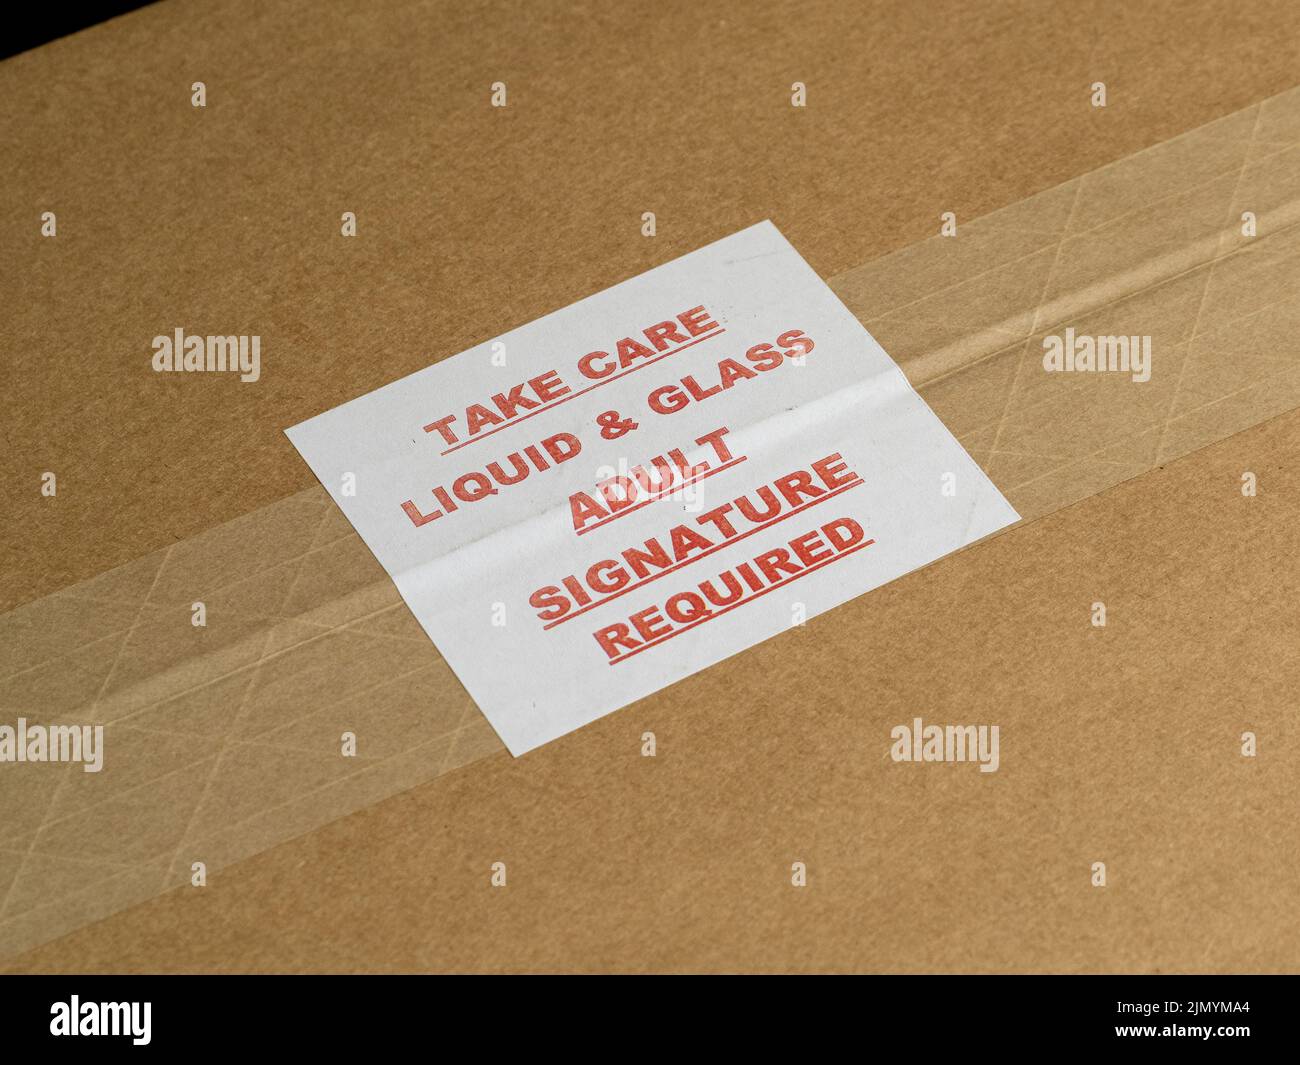 Take Care Liquid and Glass Adult Signature Required: label on a sealed brown cardboard box. Stock Photo